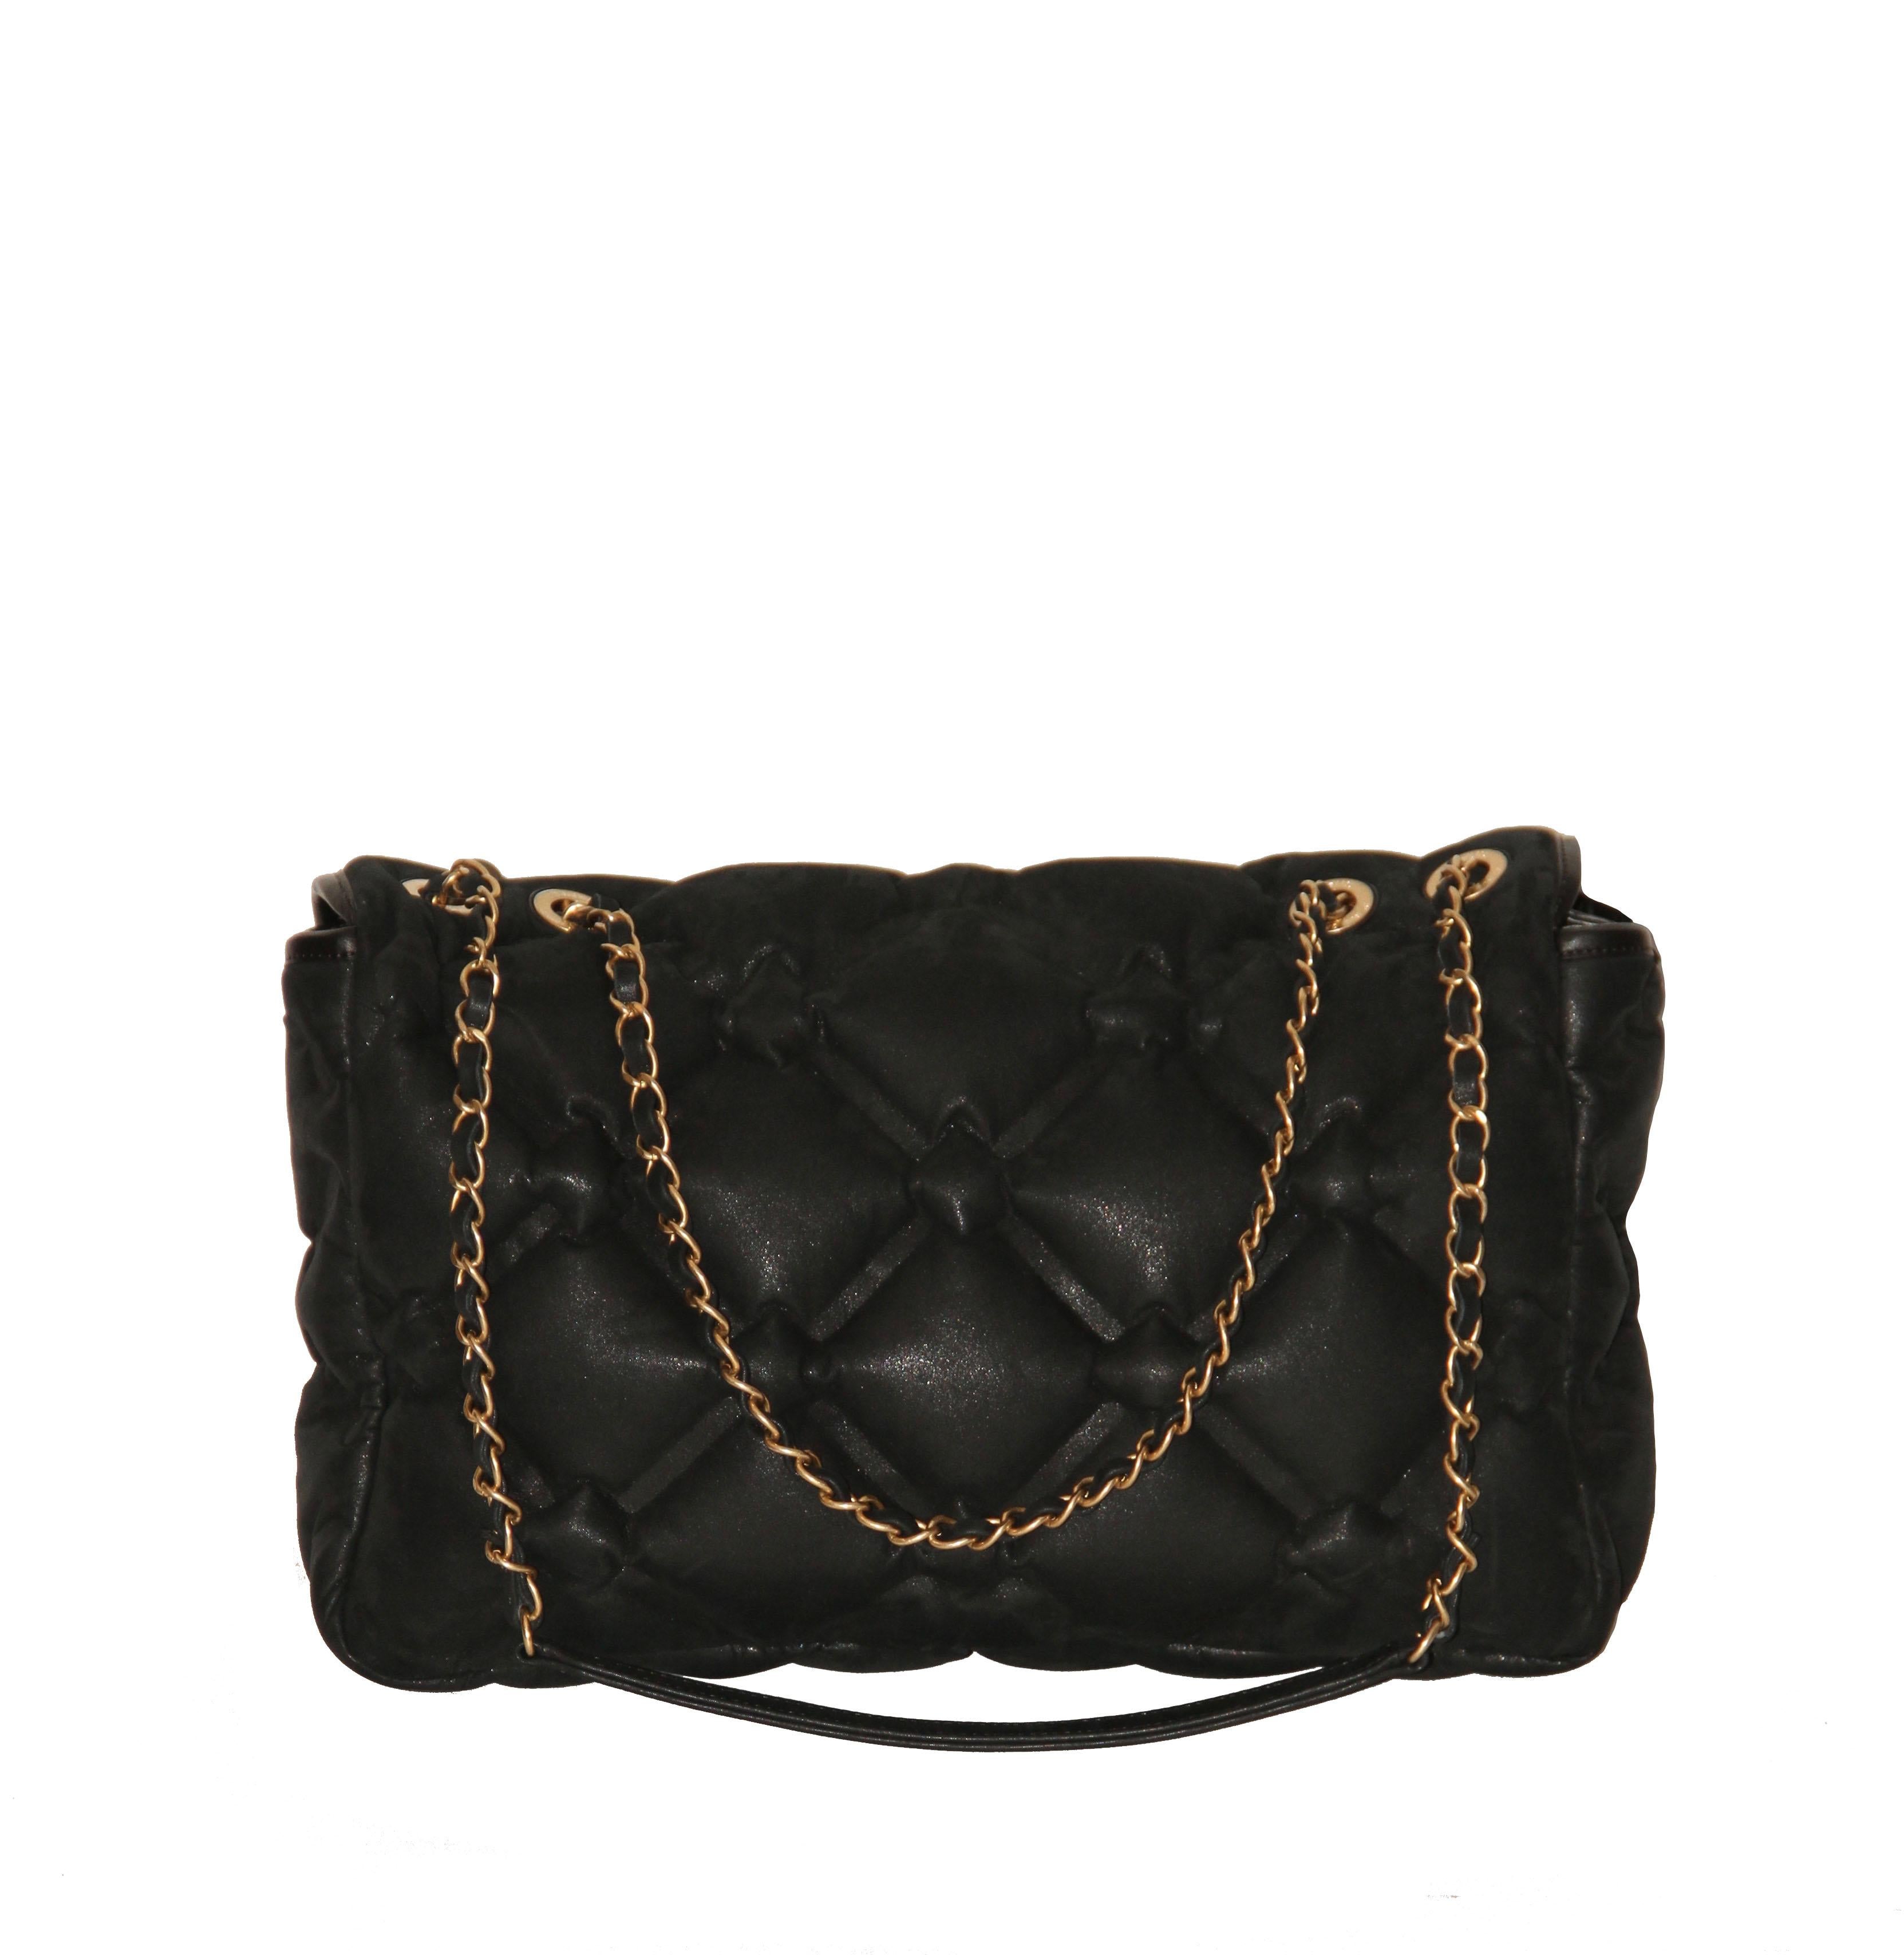 This Jumbo flap bag is crafted from black iridescent leather in chesterfield-style quilting.
The flap has a black leather trim and opens to a padded nylon lined interior. 
The bag has dual chain and leather interwoven straps. 
Its CC lock closure